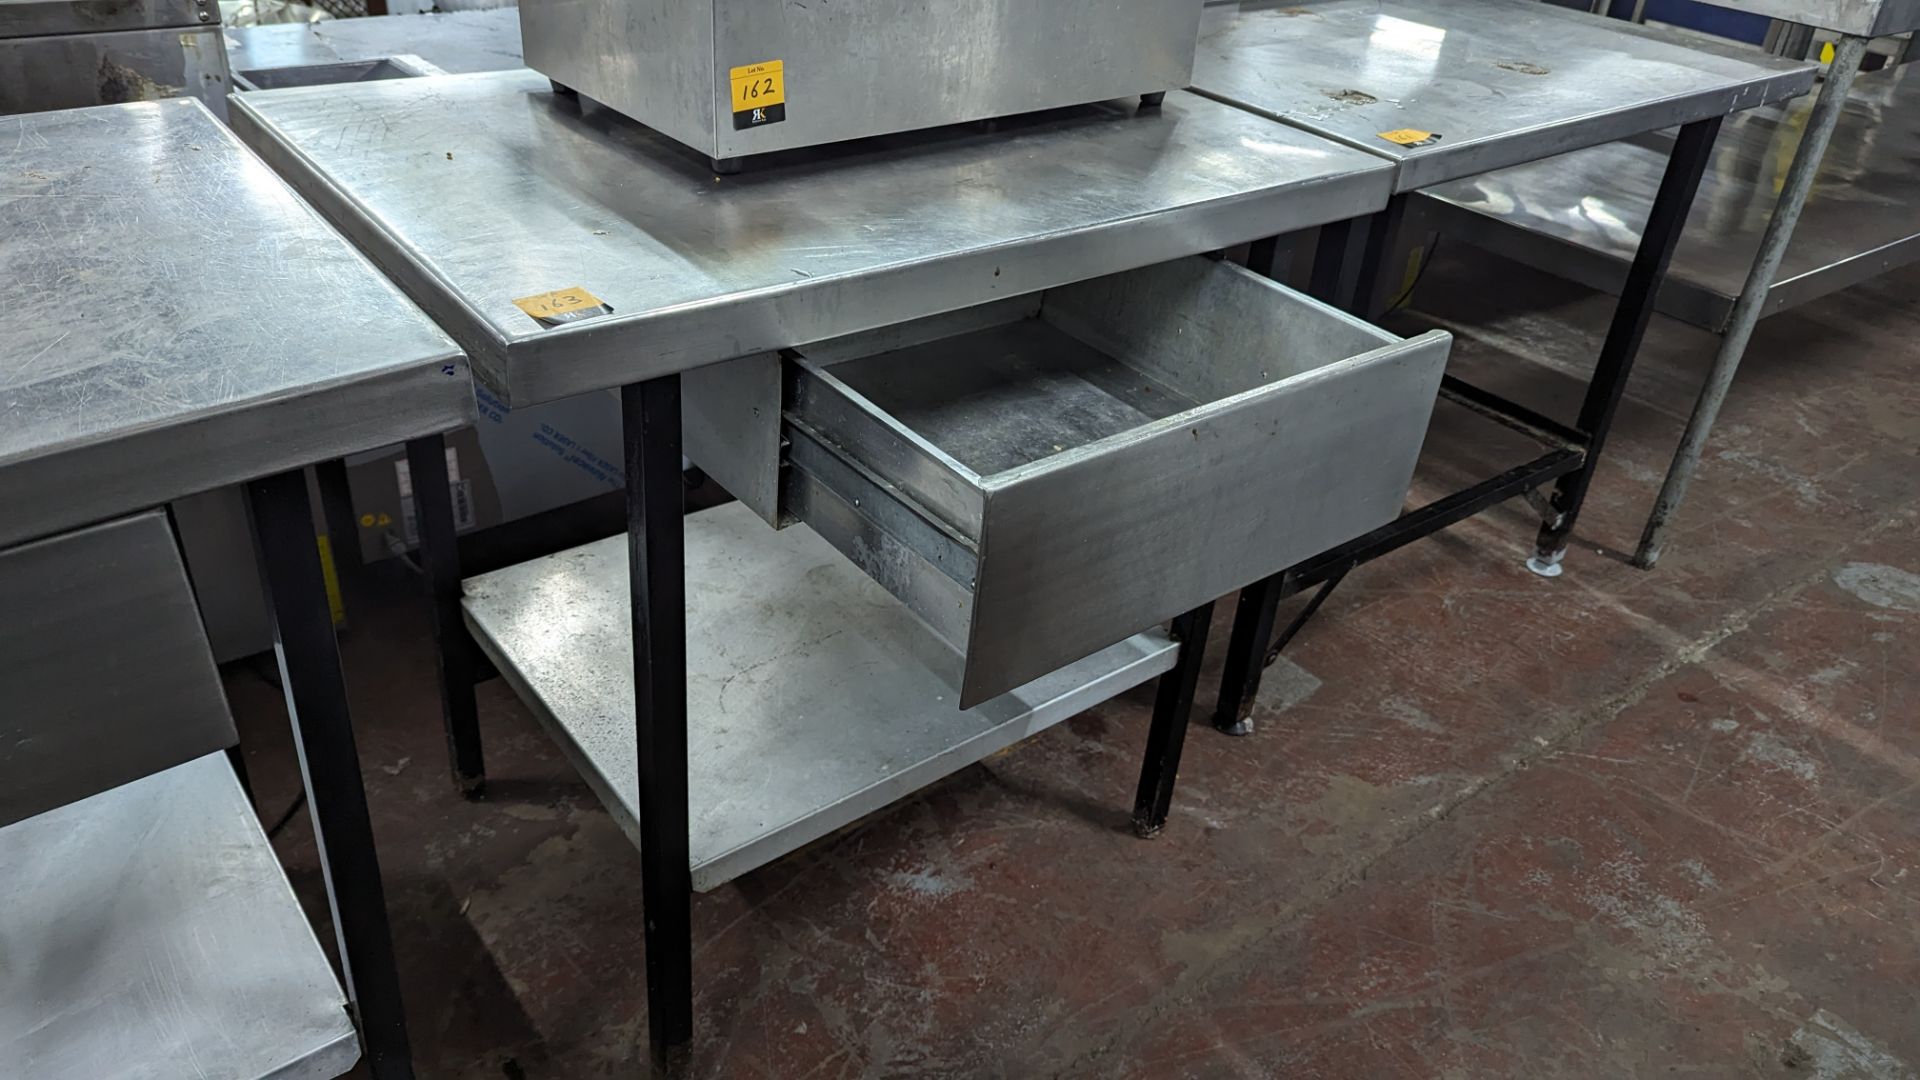 Table with stainless steel top, stainless steel pull-out drawer & shelf below. Max external dimensi - Image 4 of 4